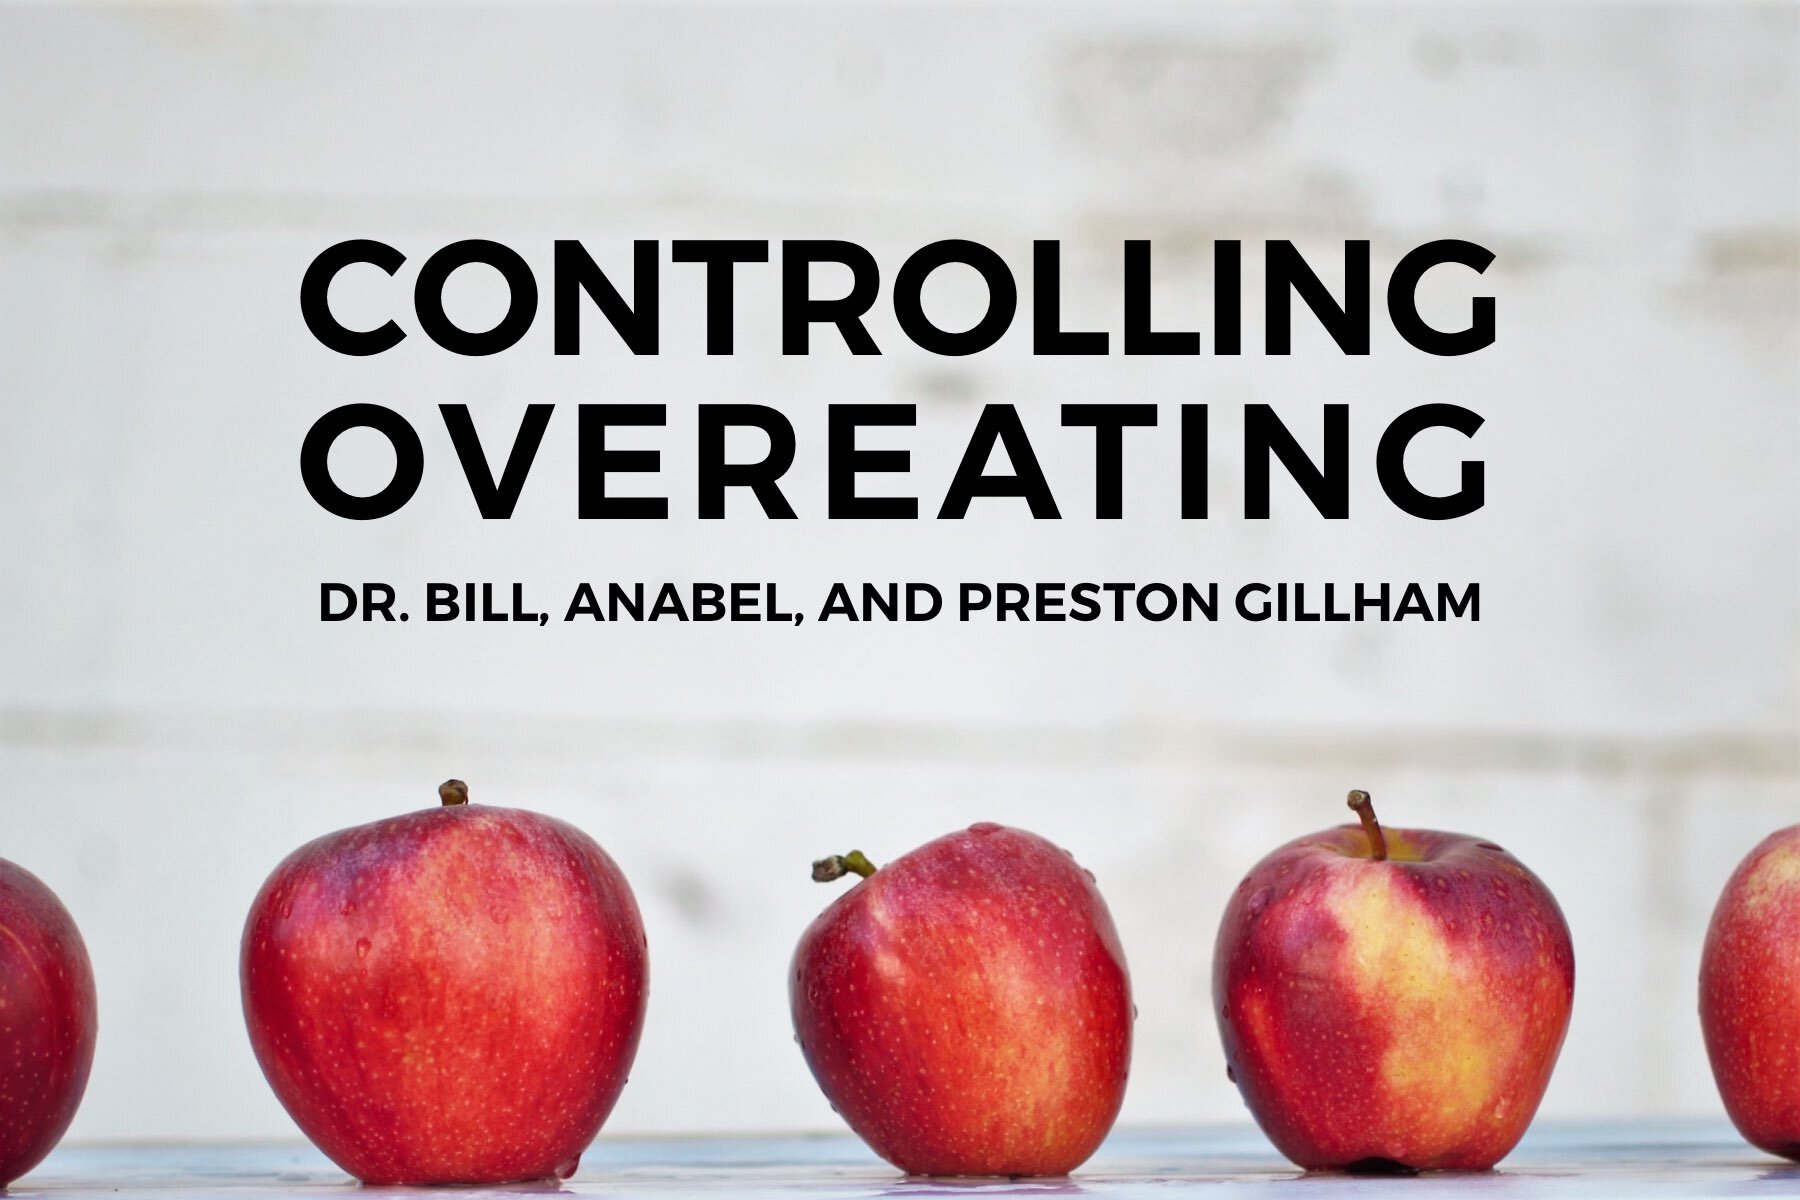 Controlling Overeating